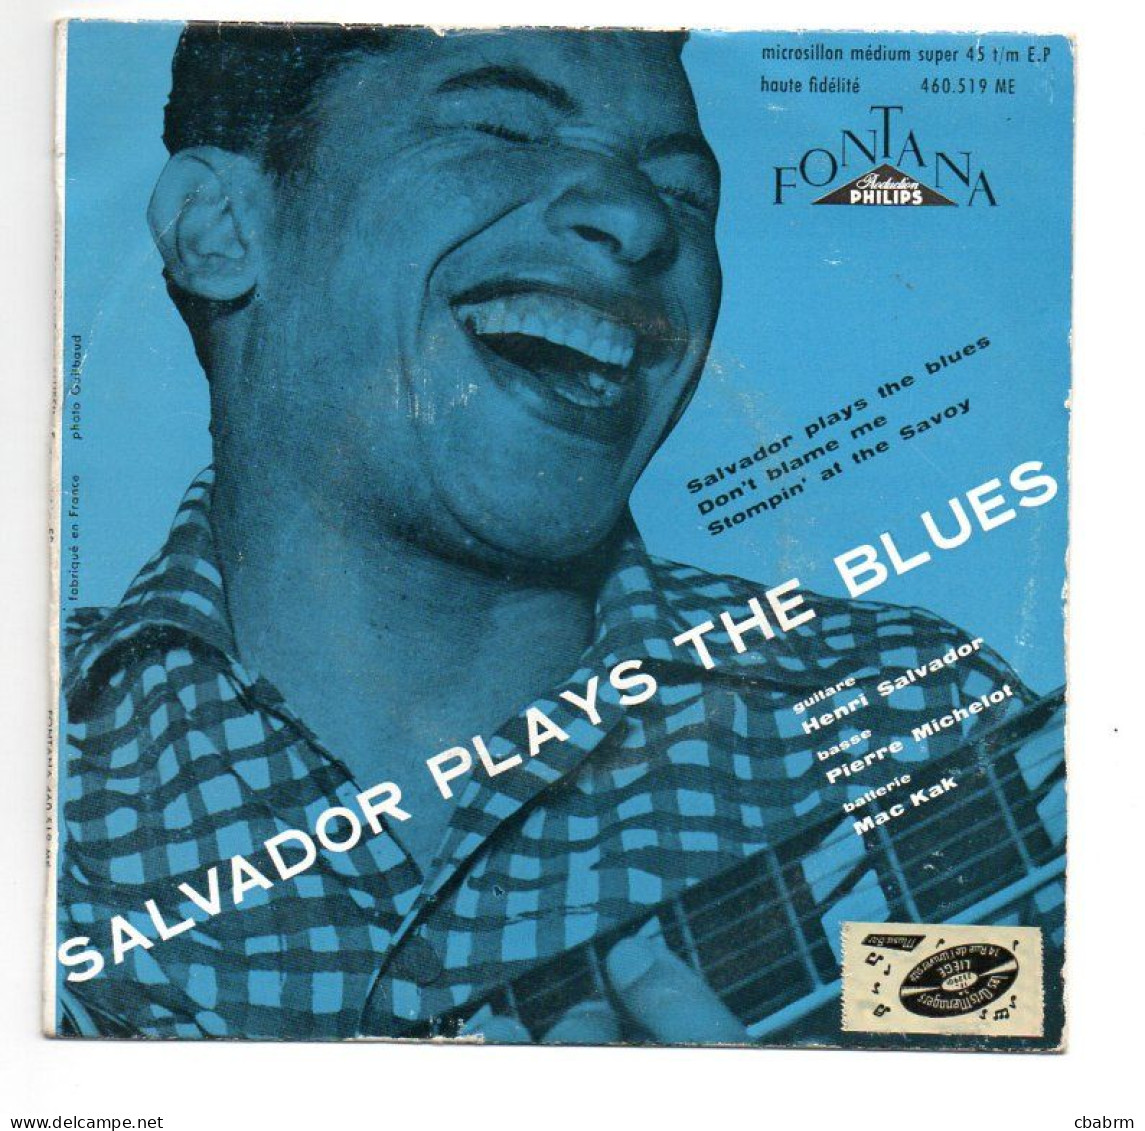 EP 45 TOURS HENRI SALVADOR PLAYS THE BLUES 1956 FRANCE Fontana 460.519 ME - Other - French Music